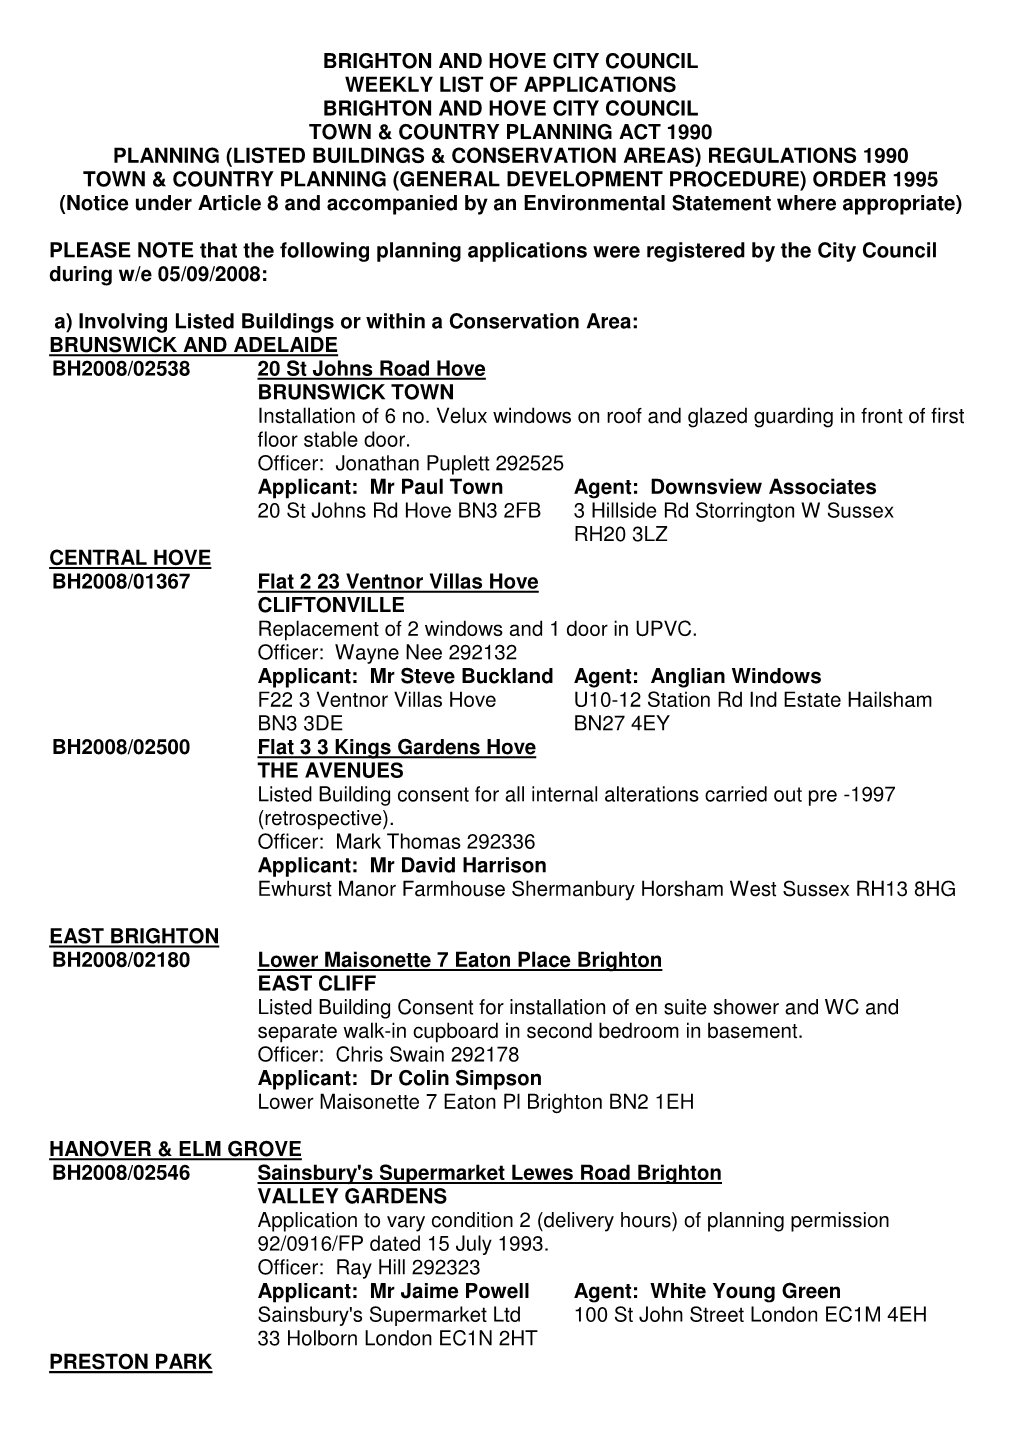 Brighton and Hove City Council Weekly List of Applications Brighton and Hove City Council Town & Country Planning Act 1990 P